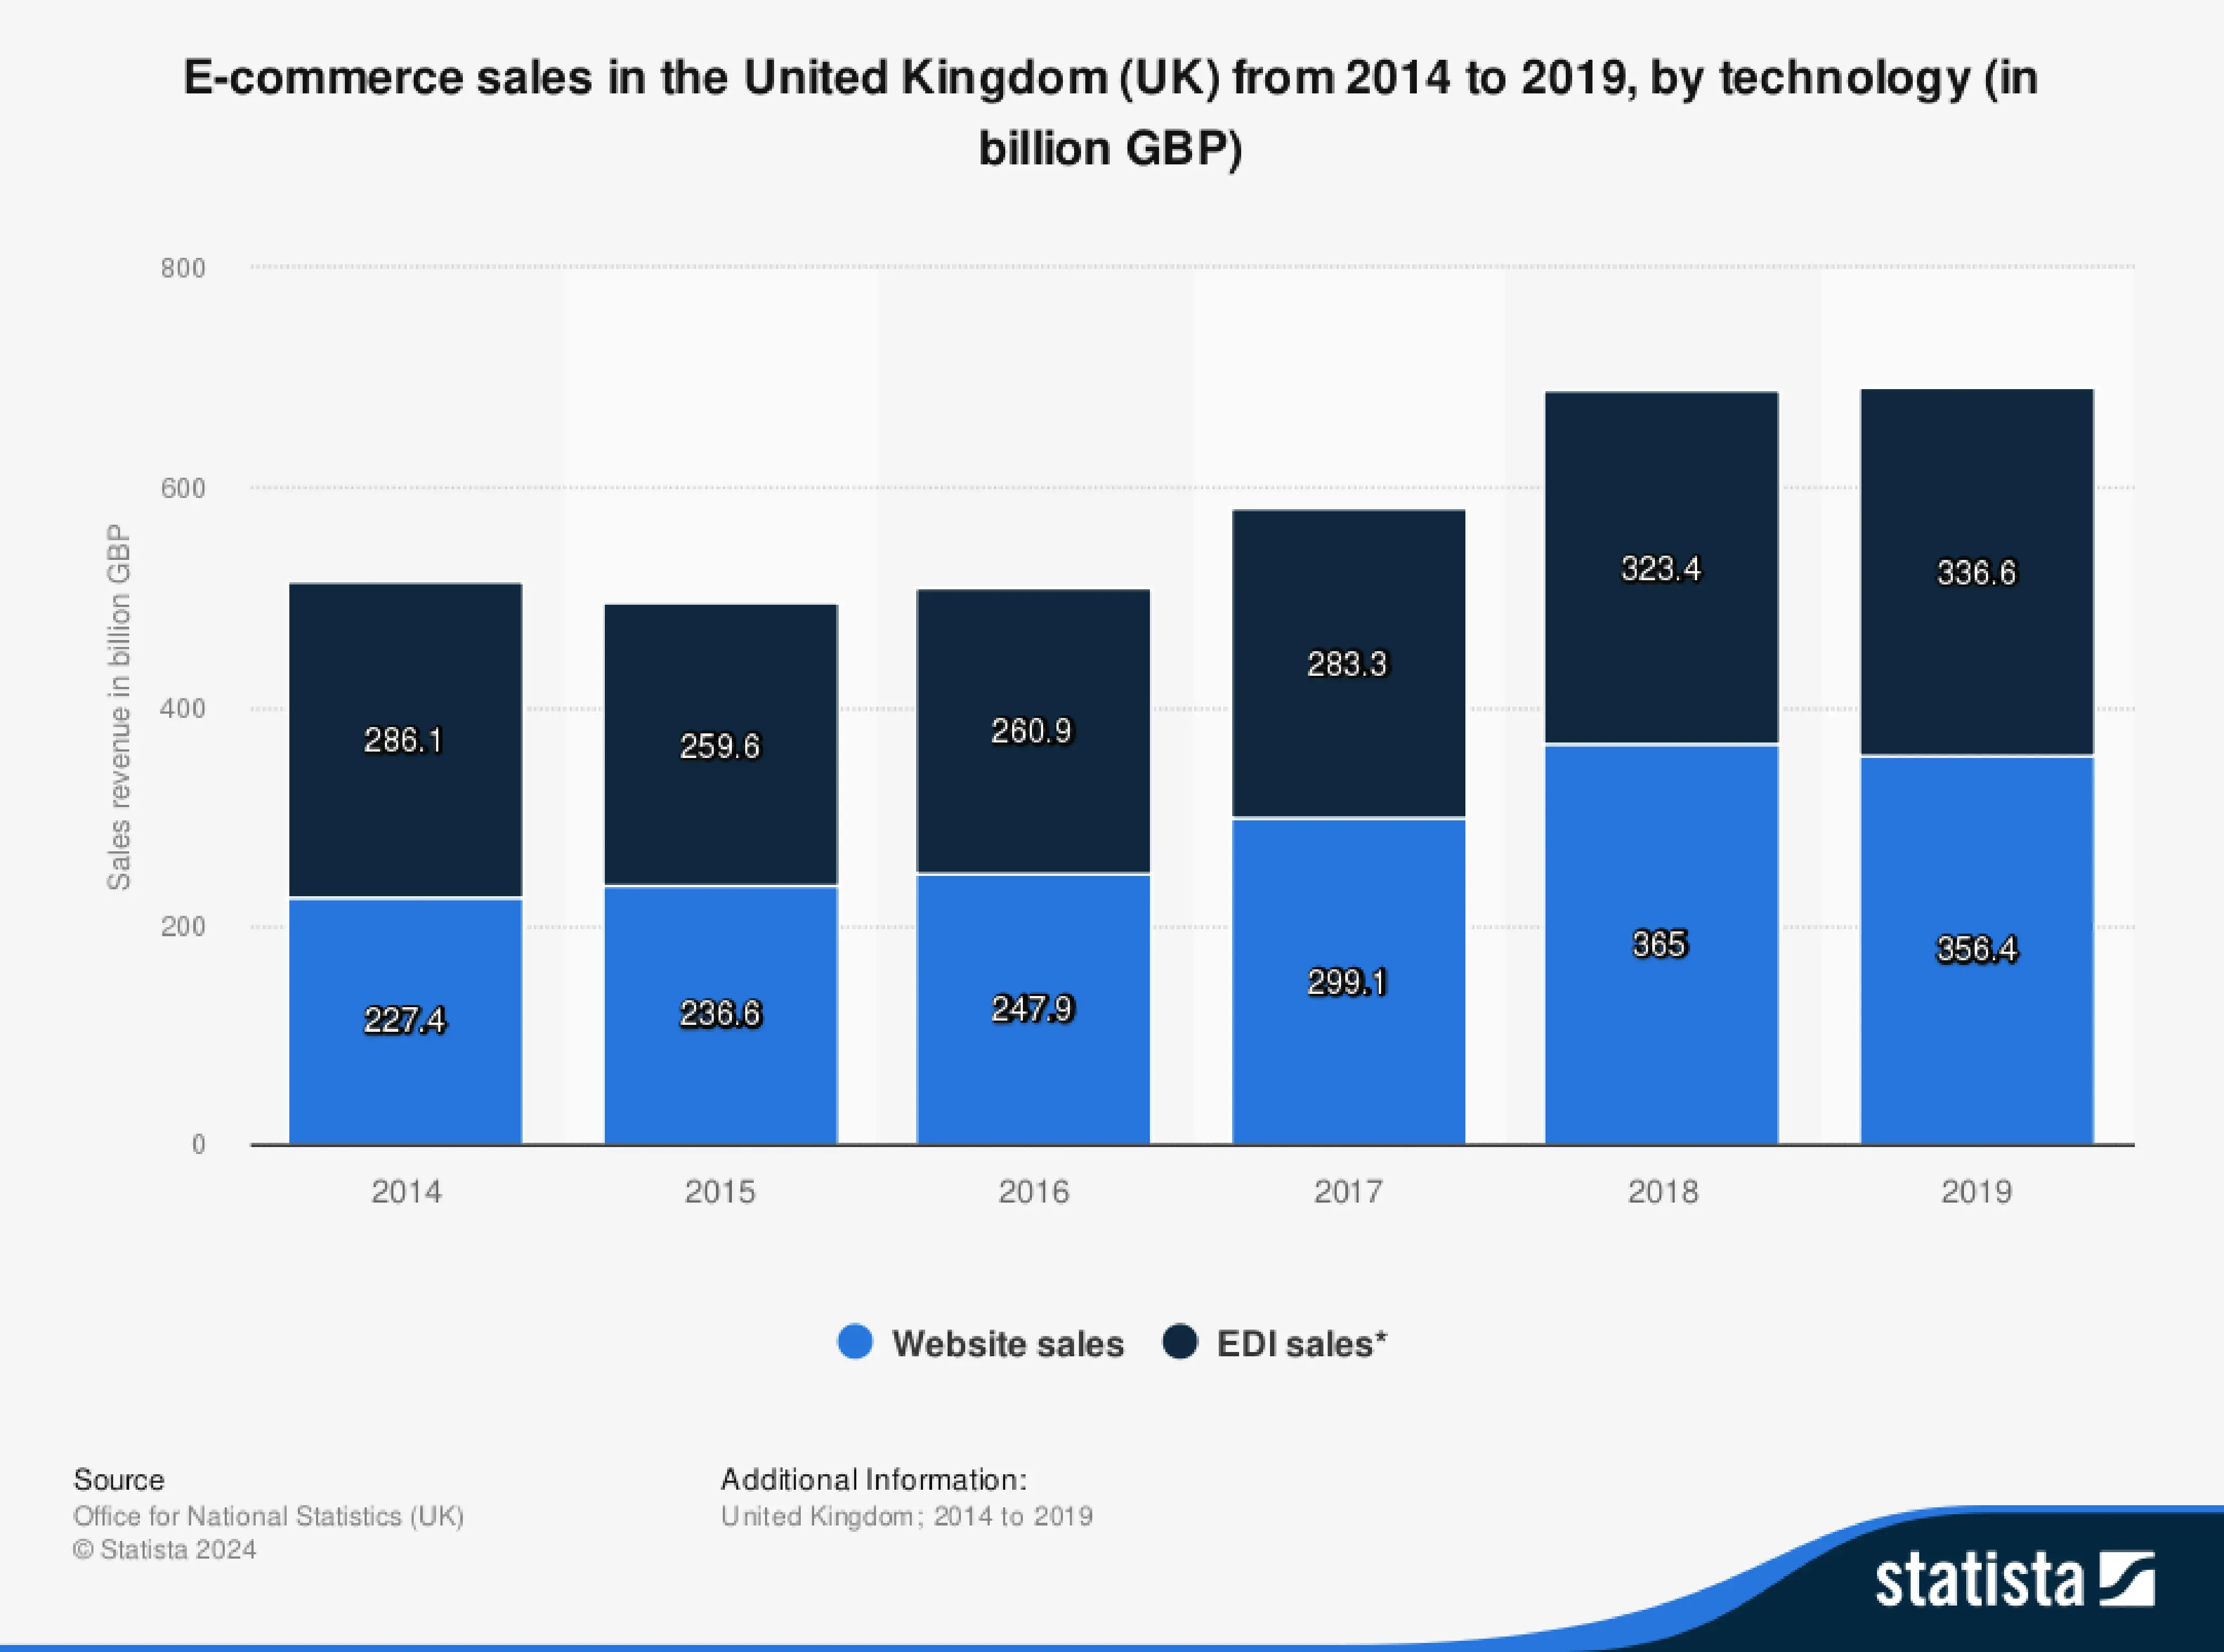 Bar chart showing e-commerce sales in the UK from 2014 to 2019 by technology, showing sales revenue in billion GBP for website sales and EDI sales each year, Website sales increased steadily